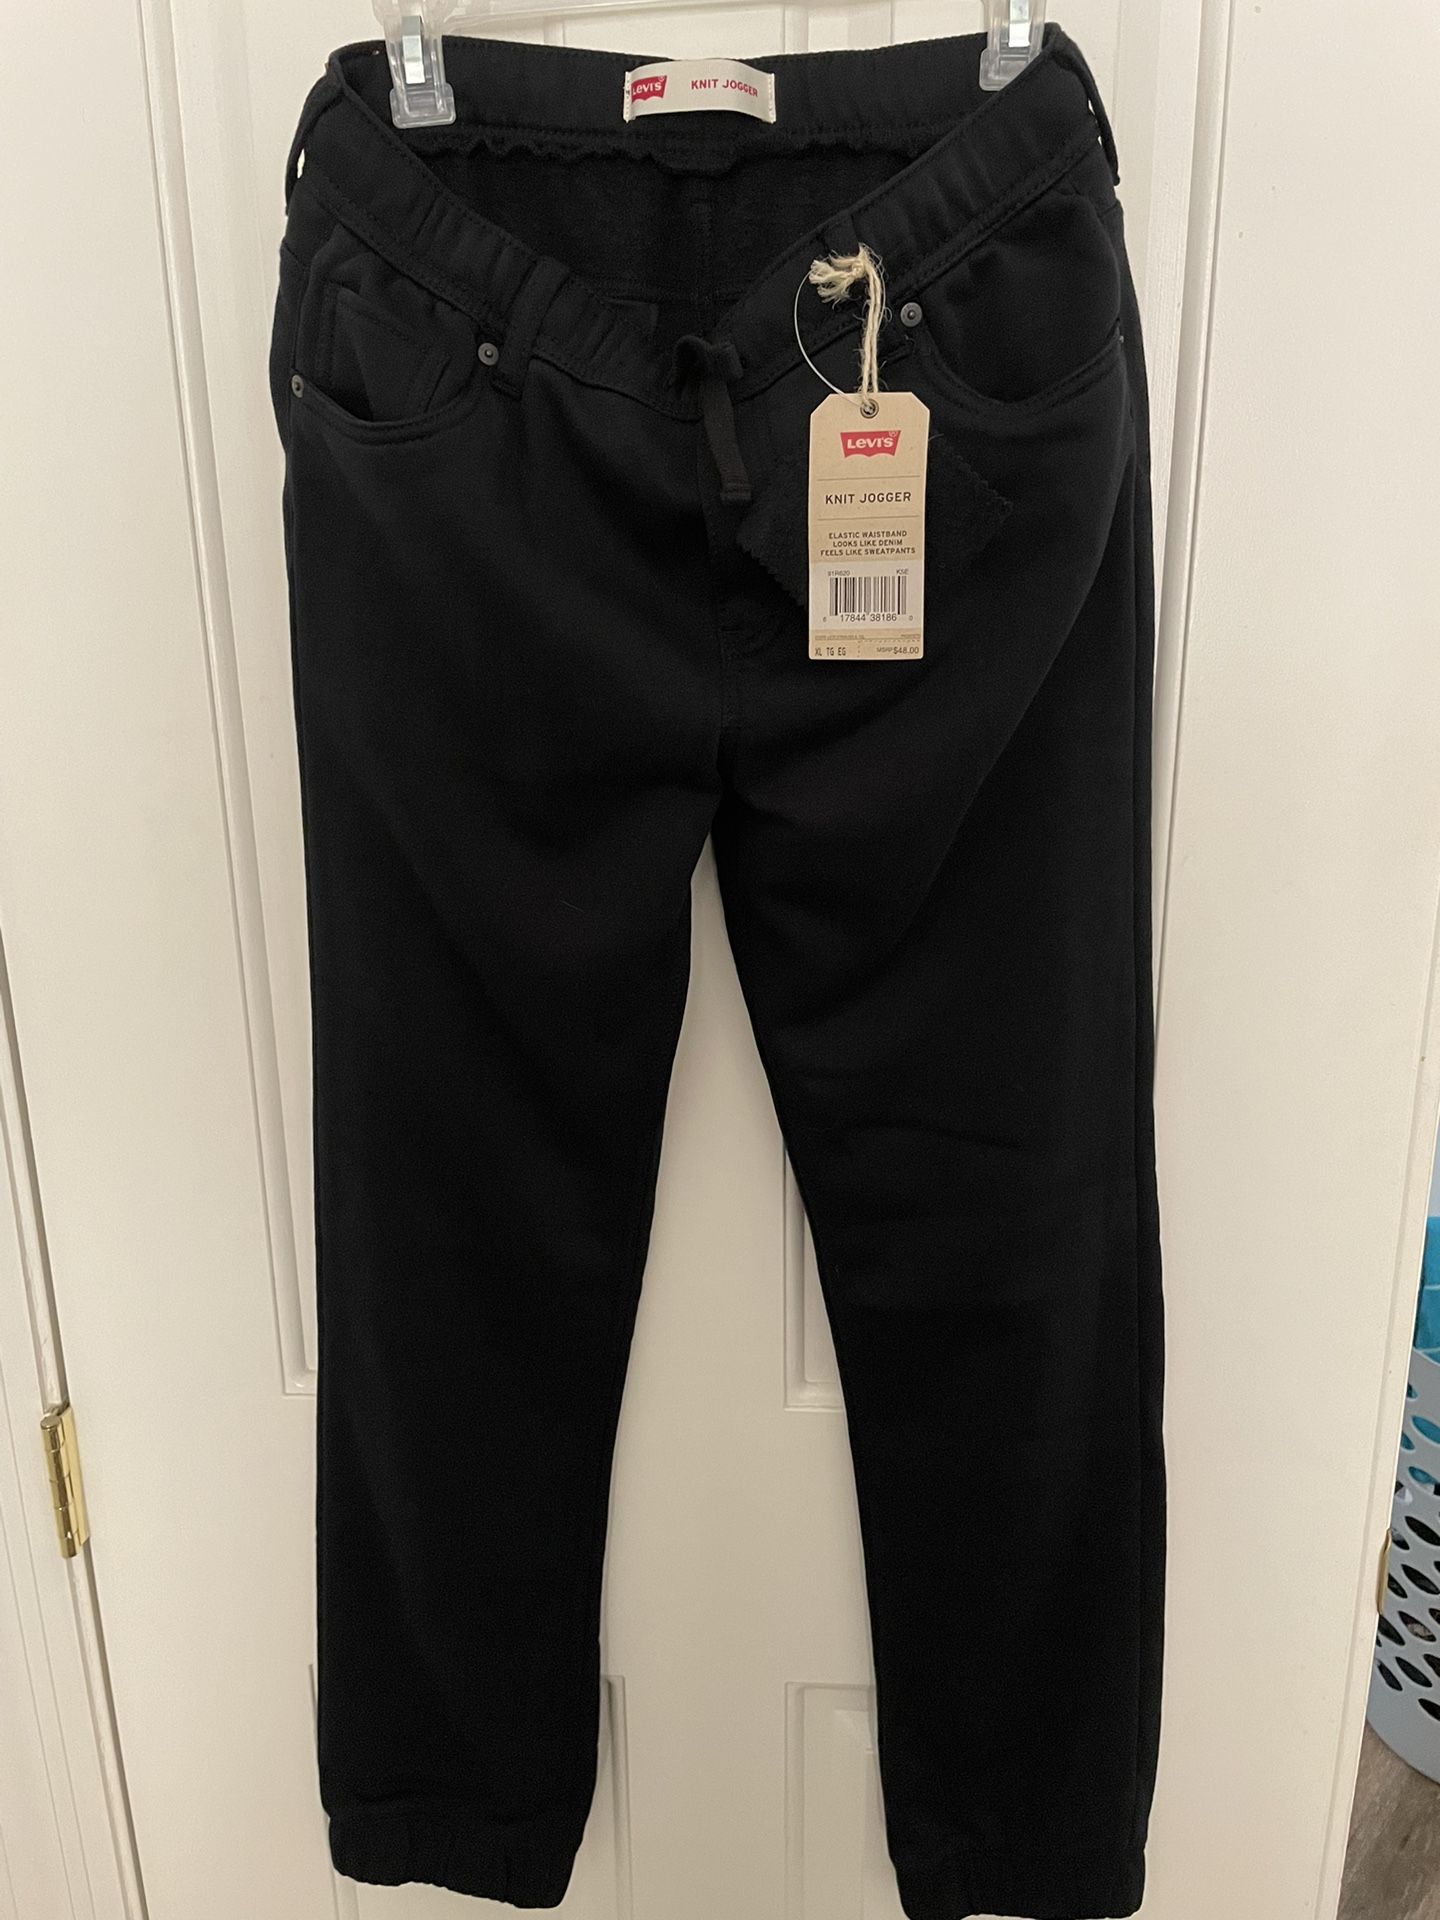 Levi’s Youth Size XL Joggers, 2 Pairs, Black, NEW